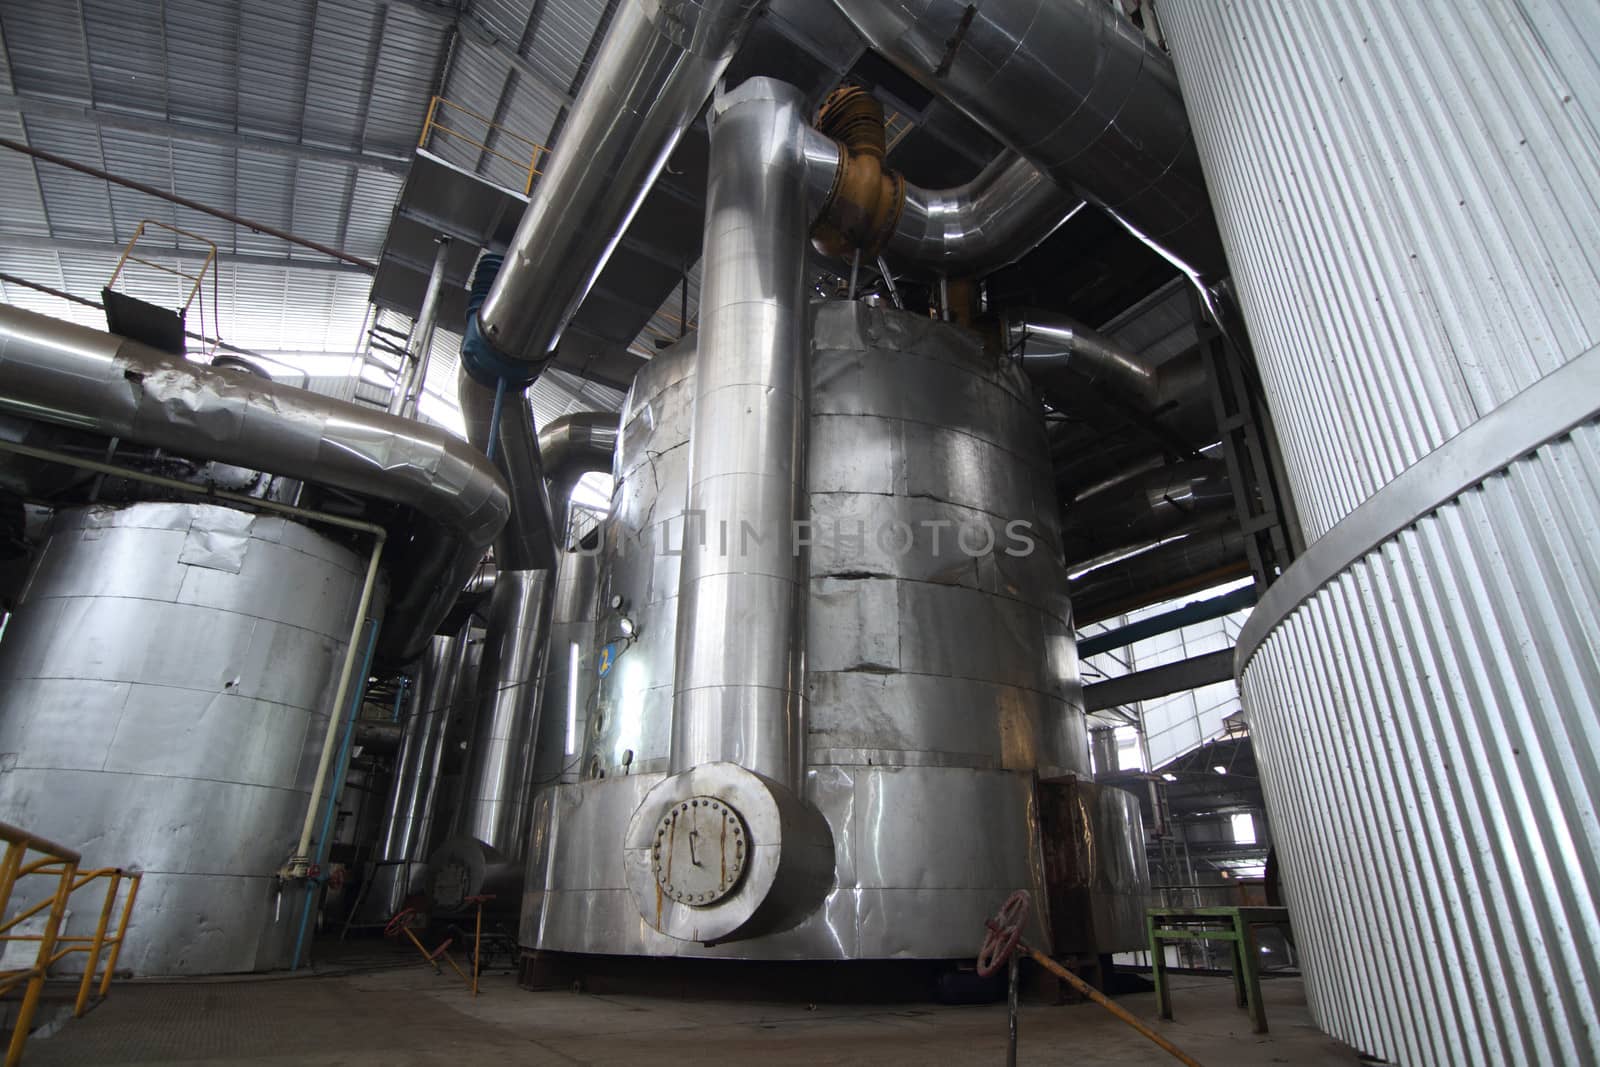 evaporator tanks in a sugar mill by photosoup